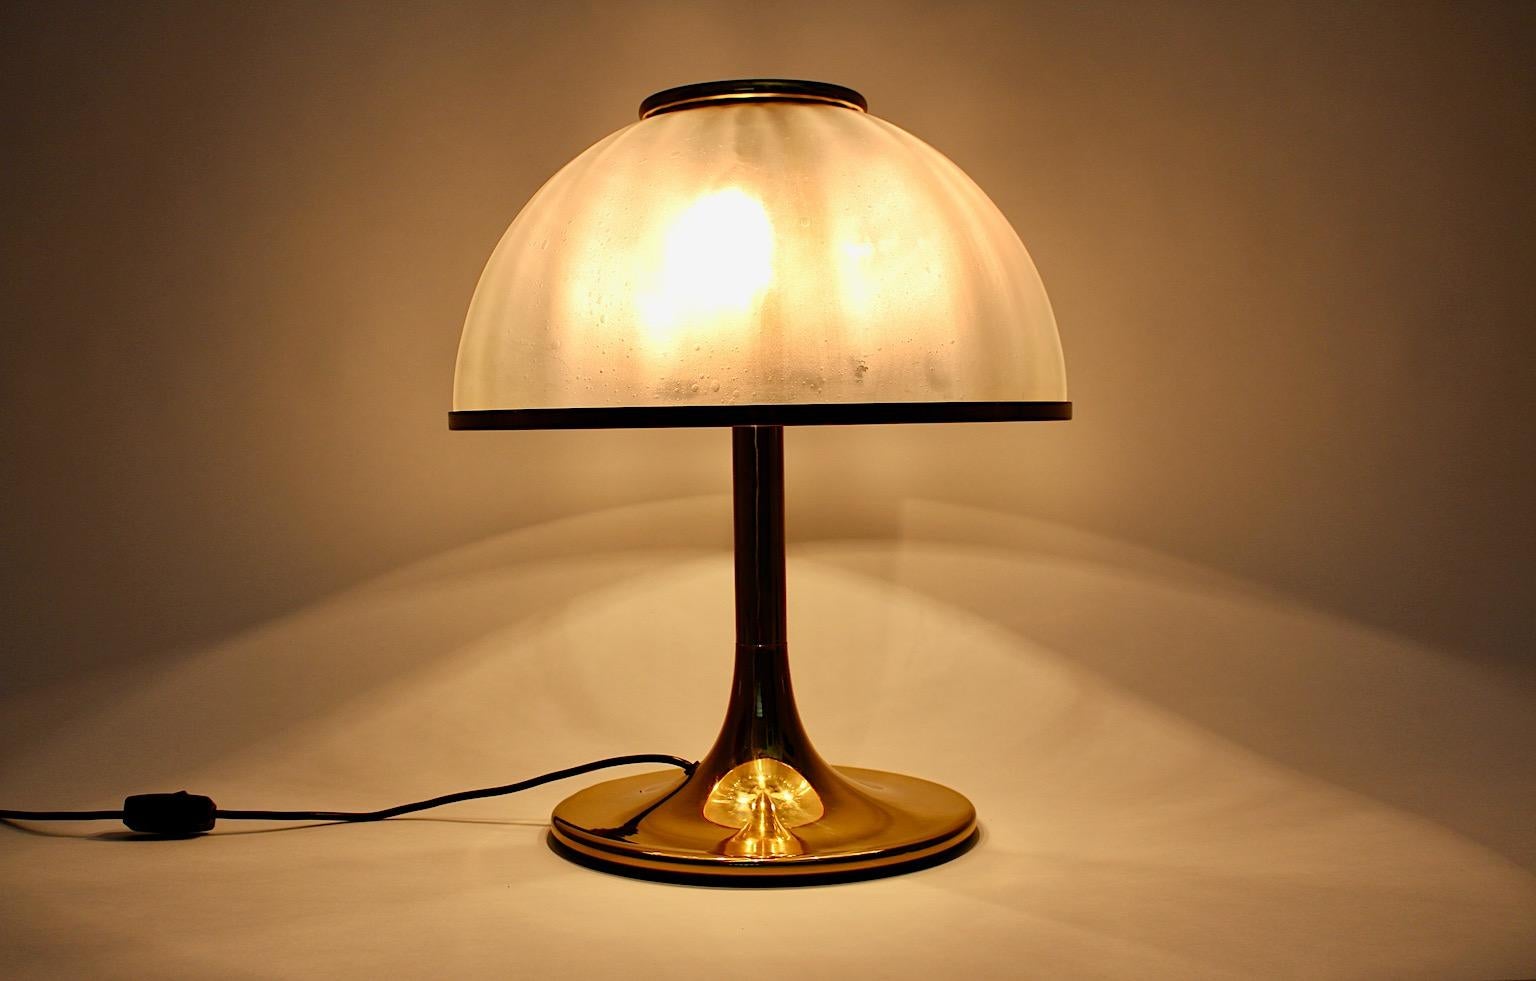 Hollywood Regency Style vintage mushroom like table lamp from brass and glass, Italy 1970s.
While the glass dome from iridescent glass shows nice glass bubbles and a brass trim, the brass base features a circular base trumpet like.
Throughout its